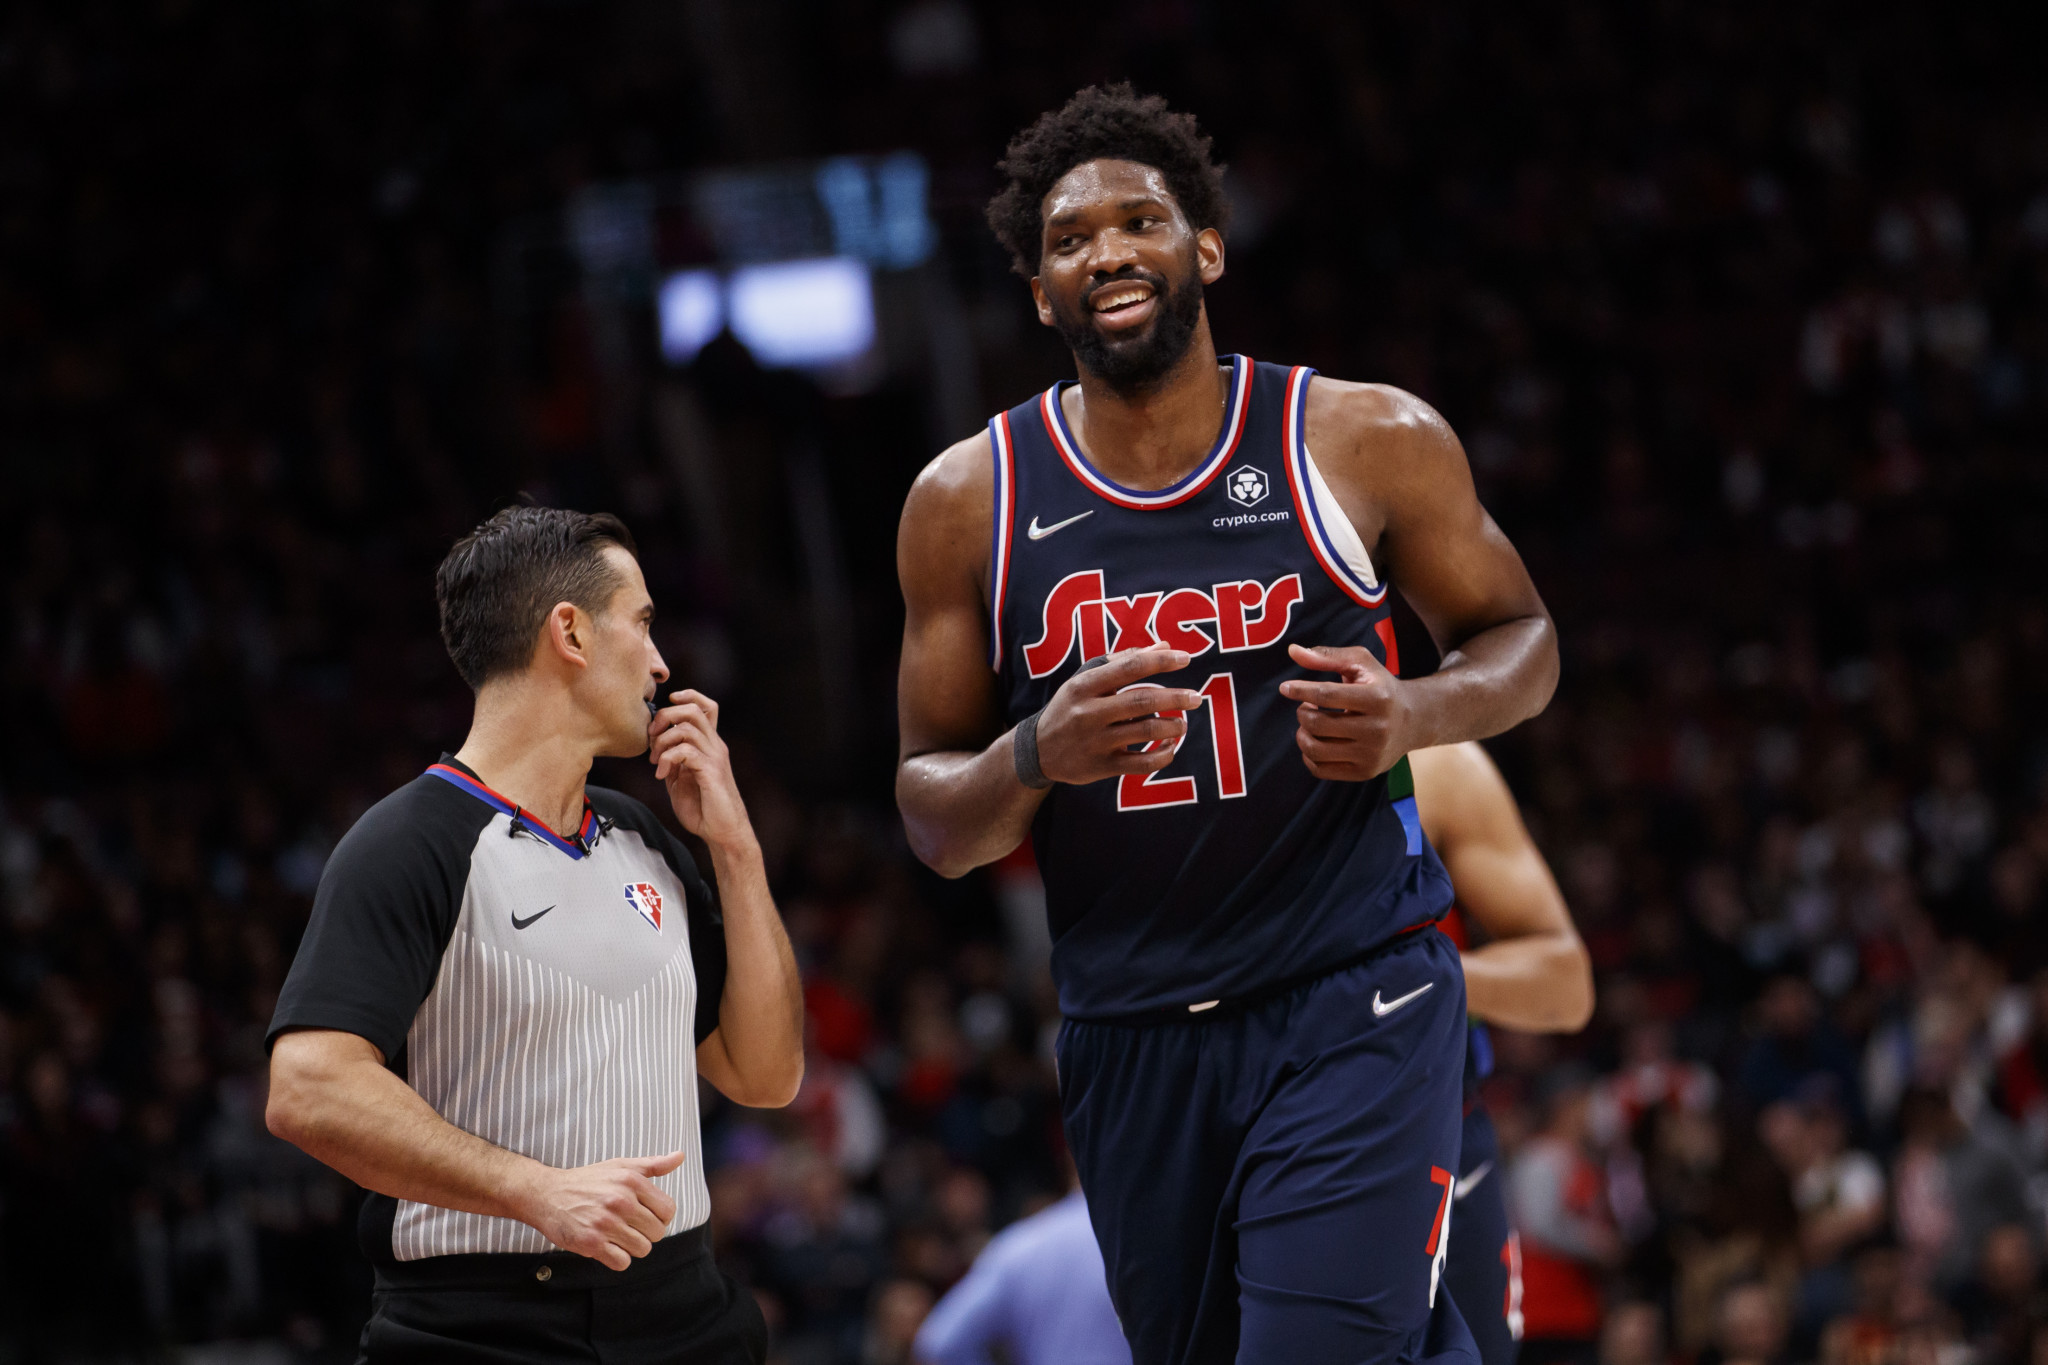 NBA star Embiid targets playing for France at Paris 2024